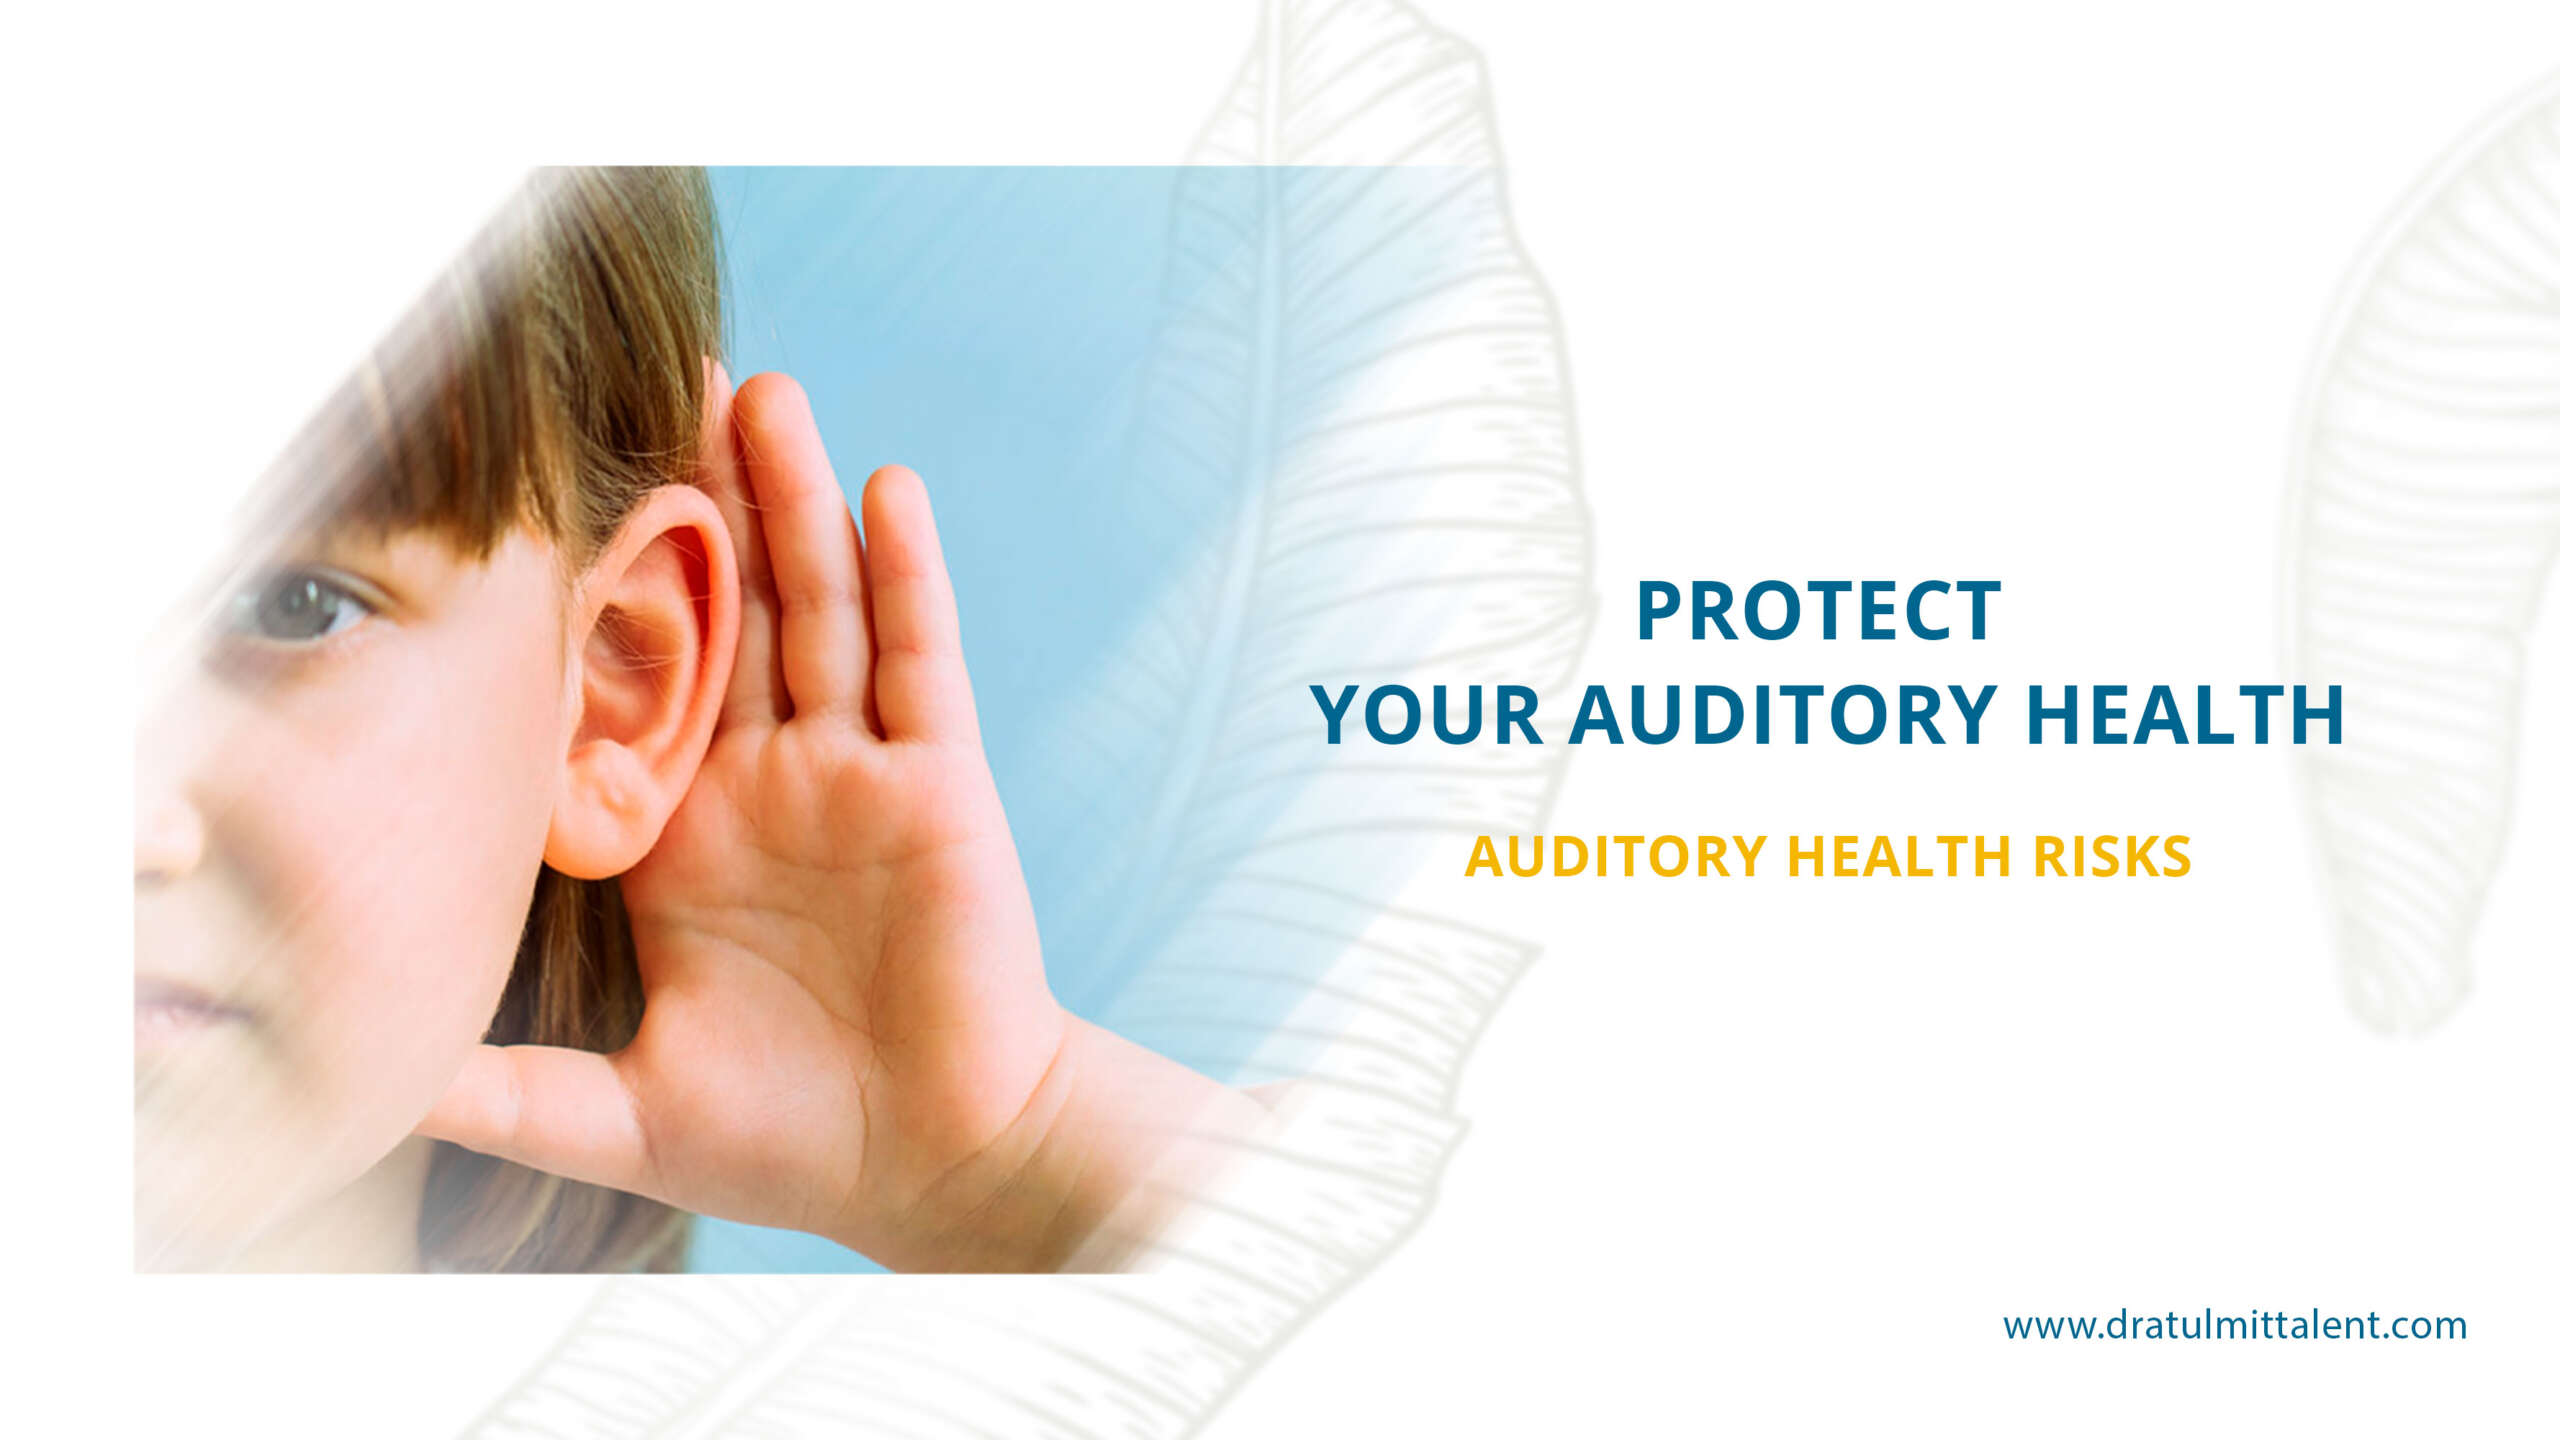 Ear Pod Hazards: Protect Your Auditory Health